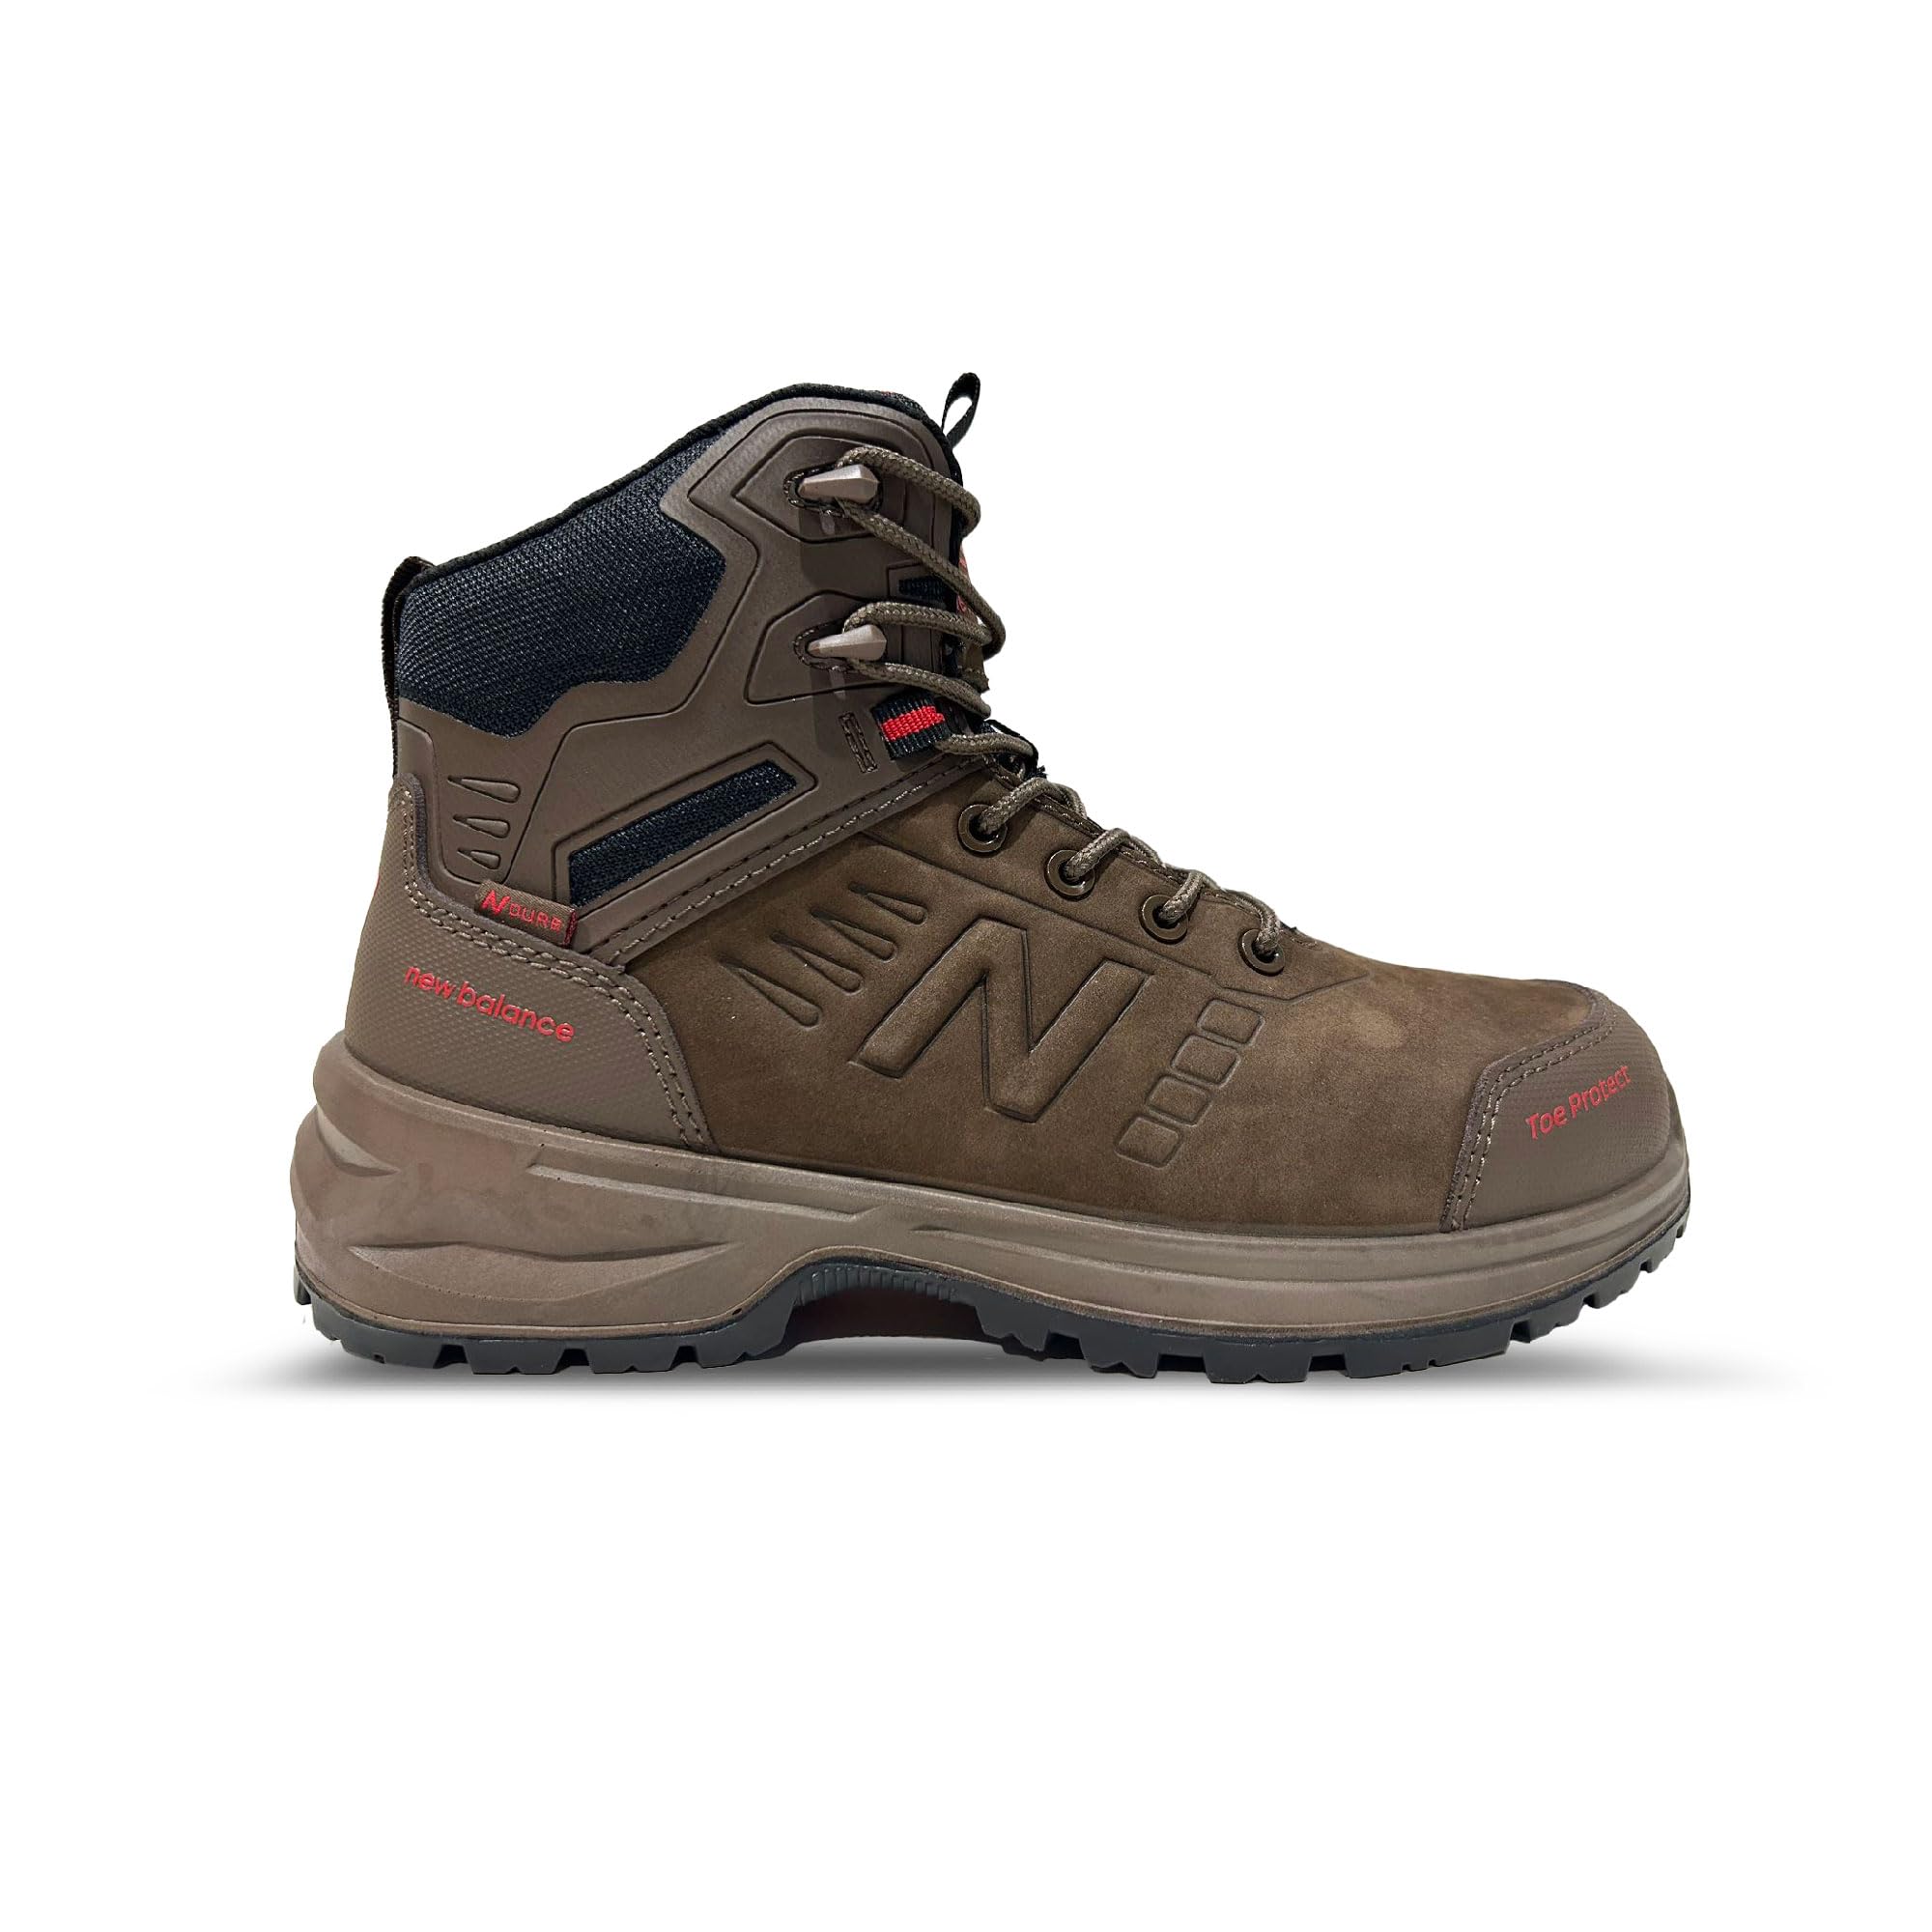 New Balance Men's Composite Toe Calibre Industrial Boot, Chocolate, 9 Wide